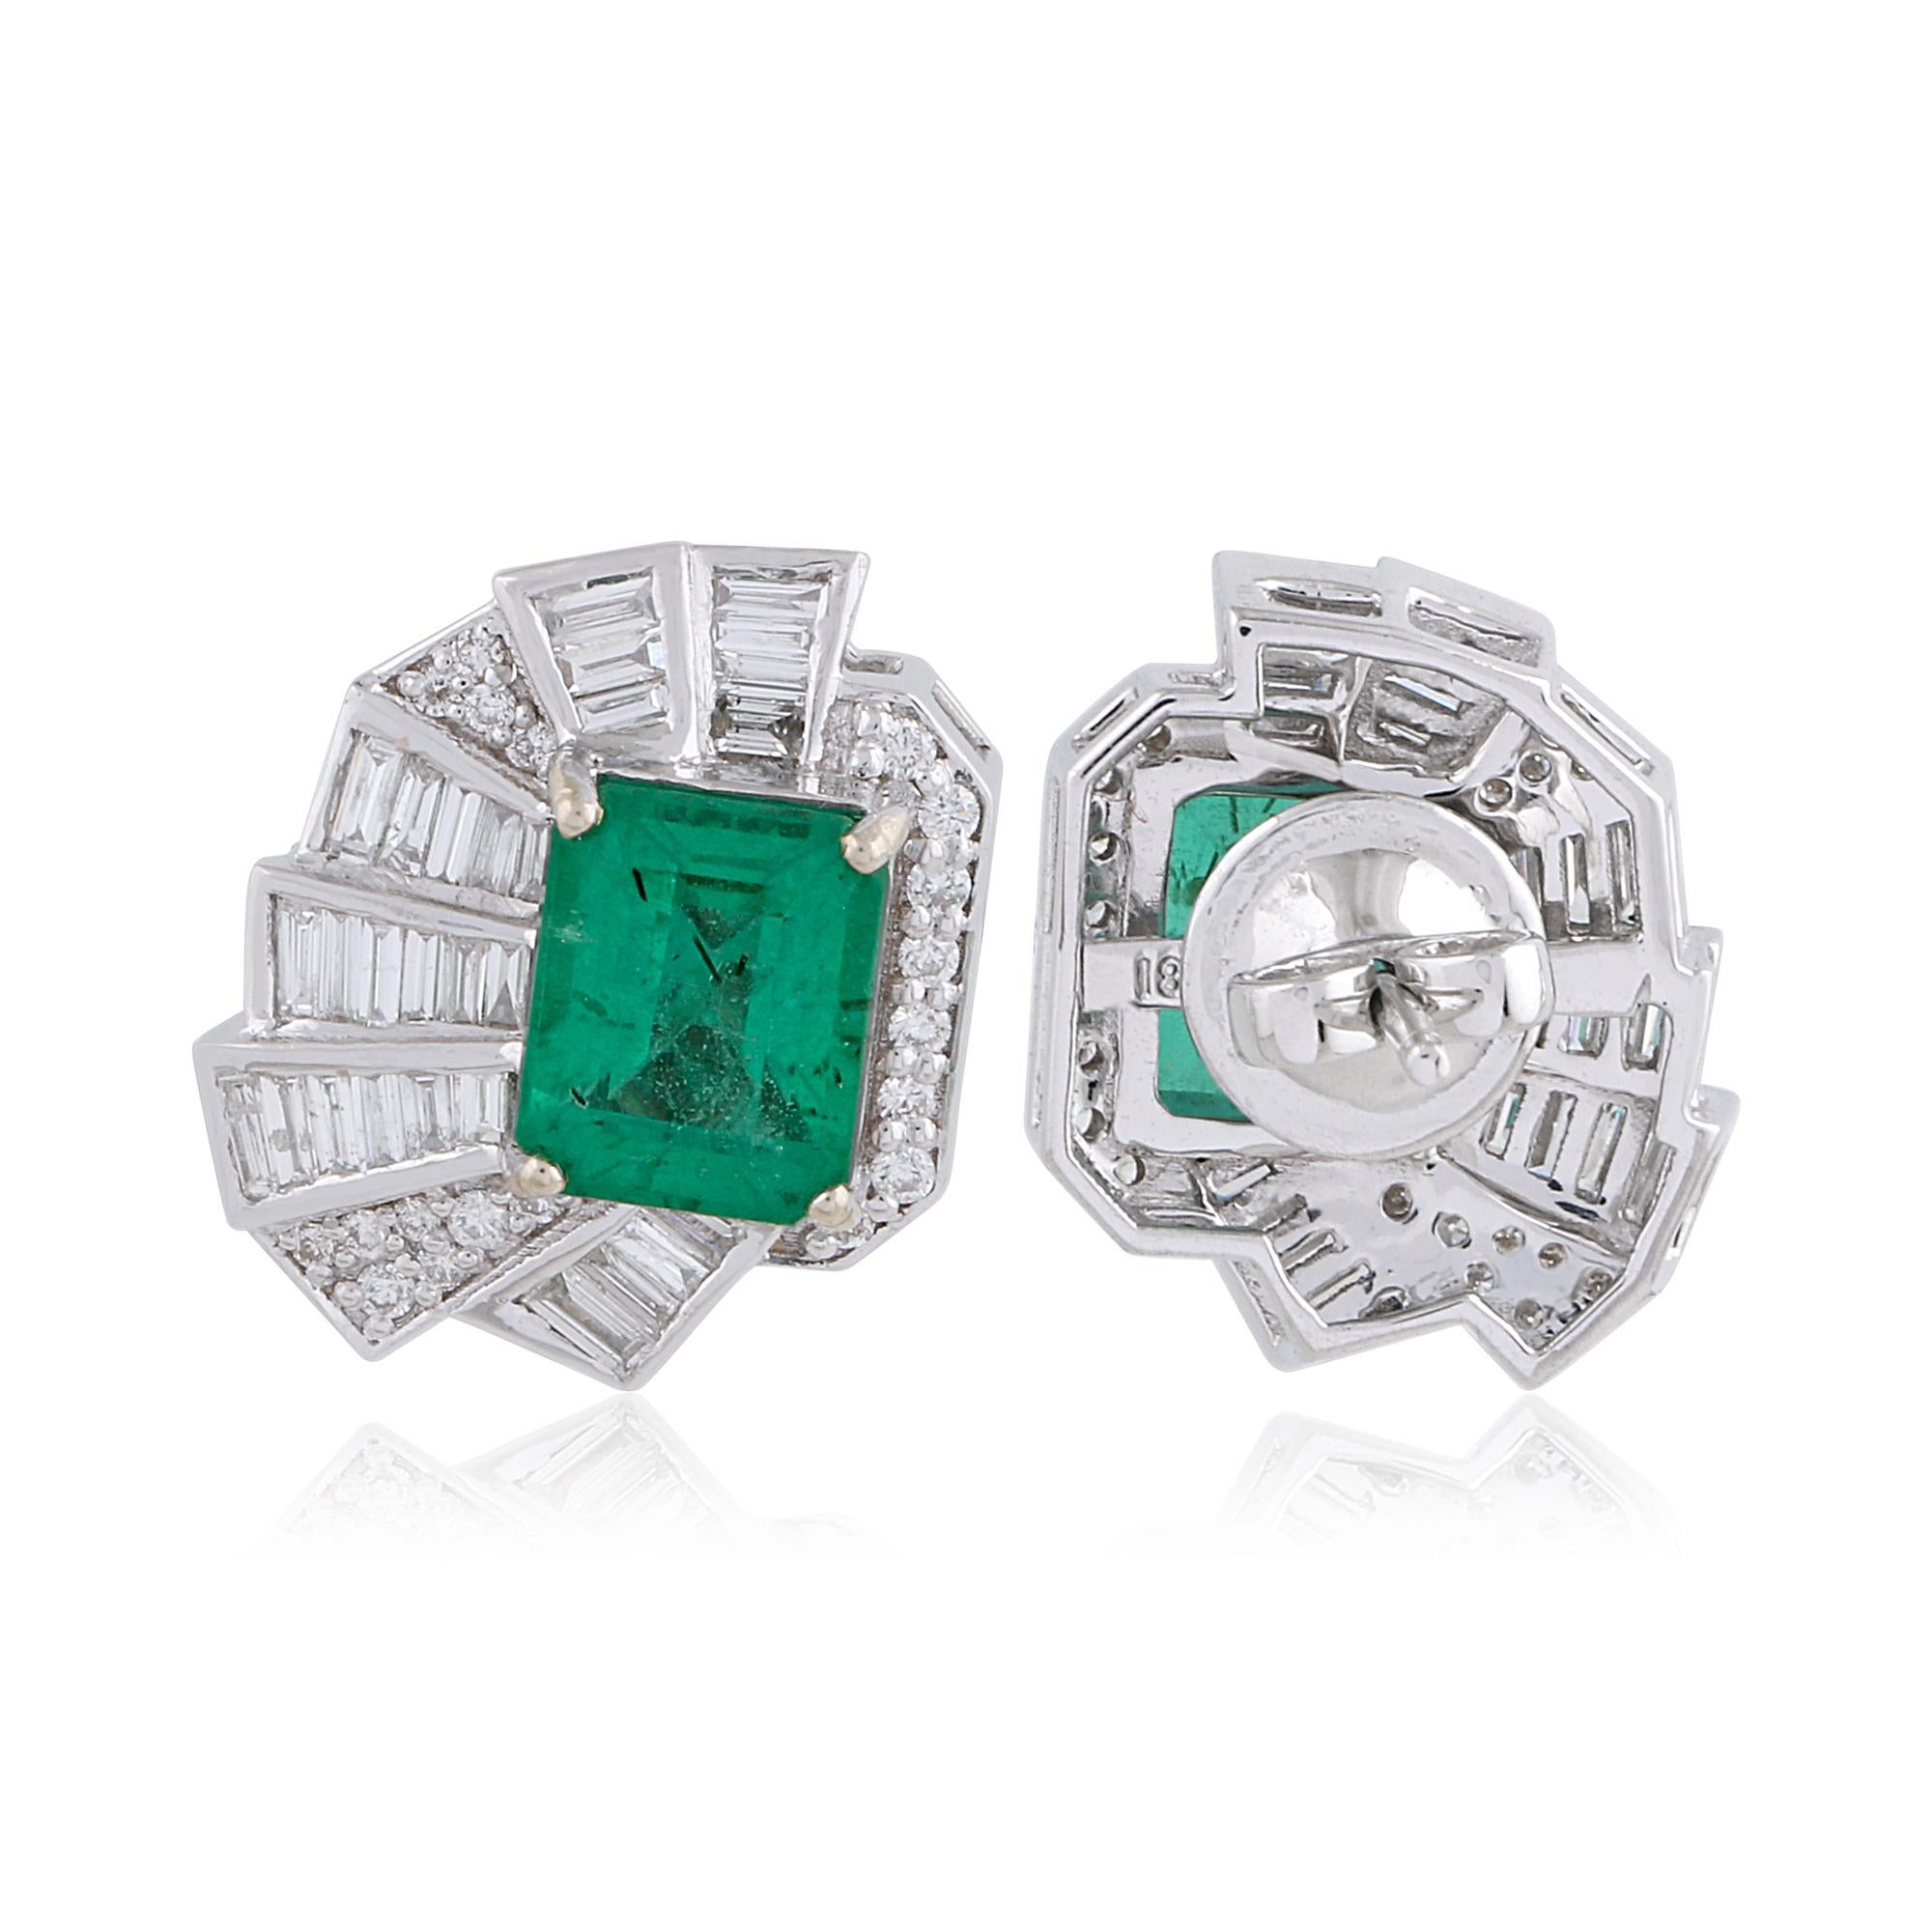 Item Code :- SEE-1011
Gross Wt. :- 8.08 gm
18k Solid White Gold Wt. :- 7.51 gm
Natural Diamond Wt. :- 0.90 Ct. ( AVERAGE DIAMOND CLARITY SI1-SI2 & COLOR H-I )
Zambian Emerald Wt. :- 1.94 Ct.

✦ Sizing
.....................
We can adjust most items